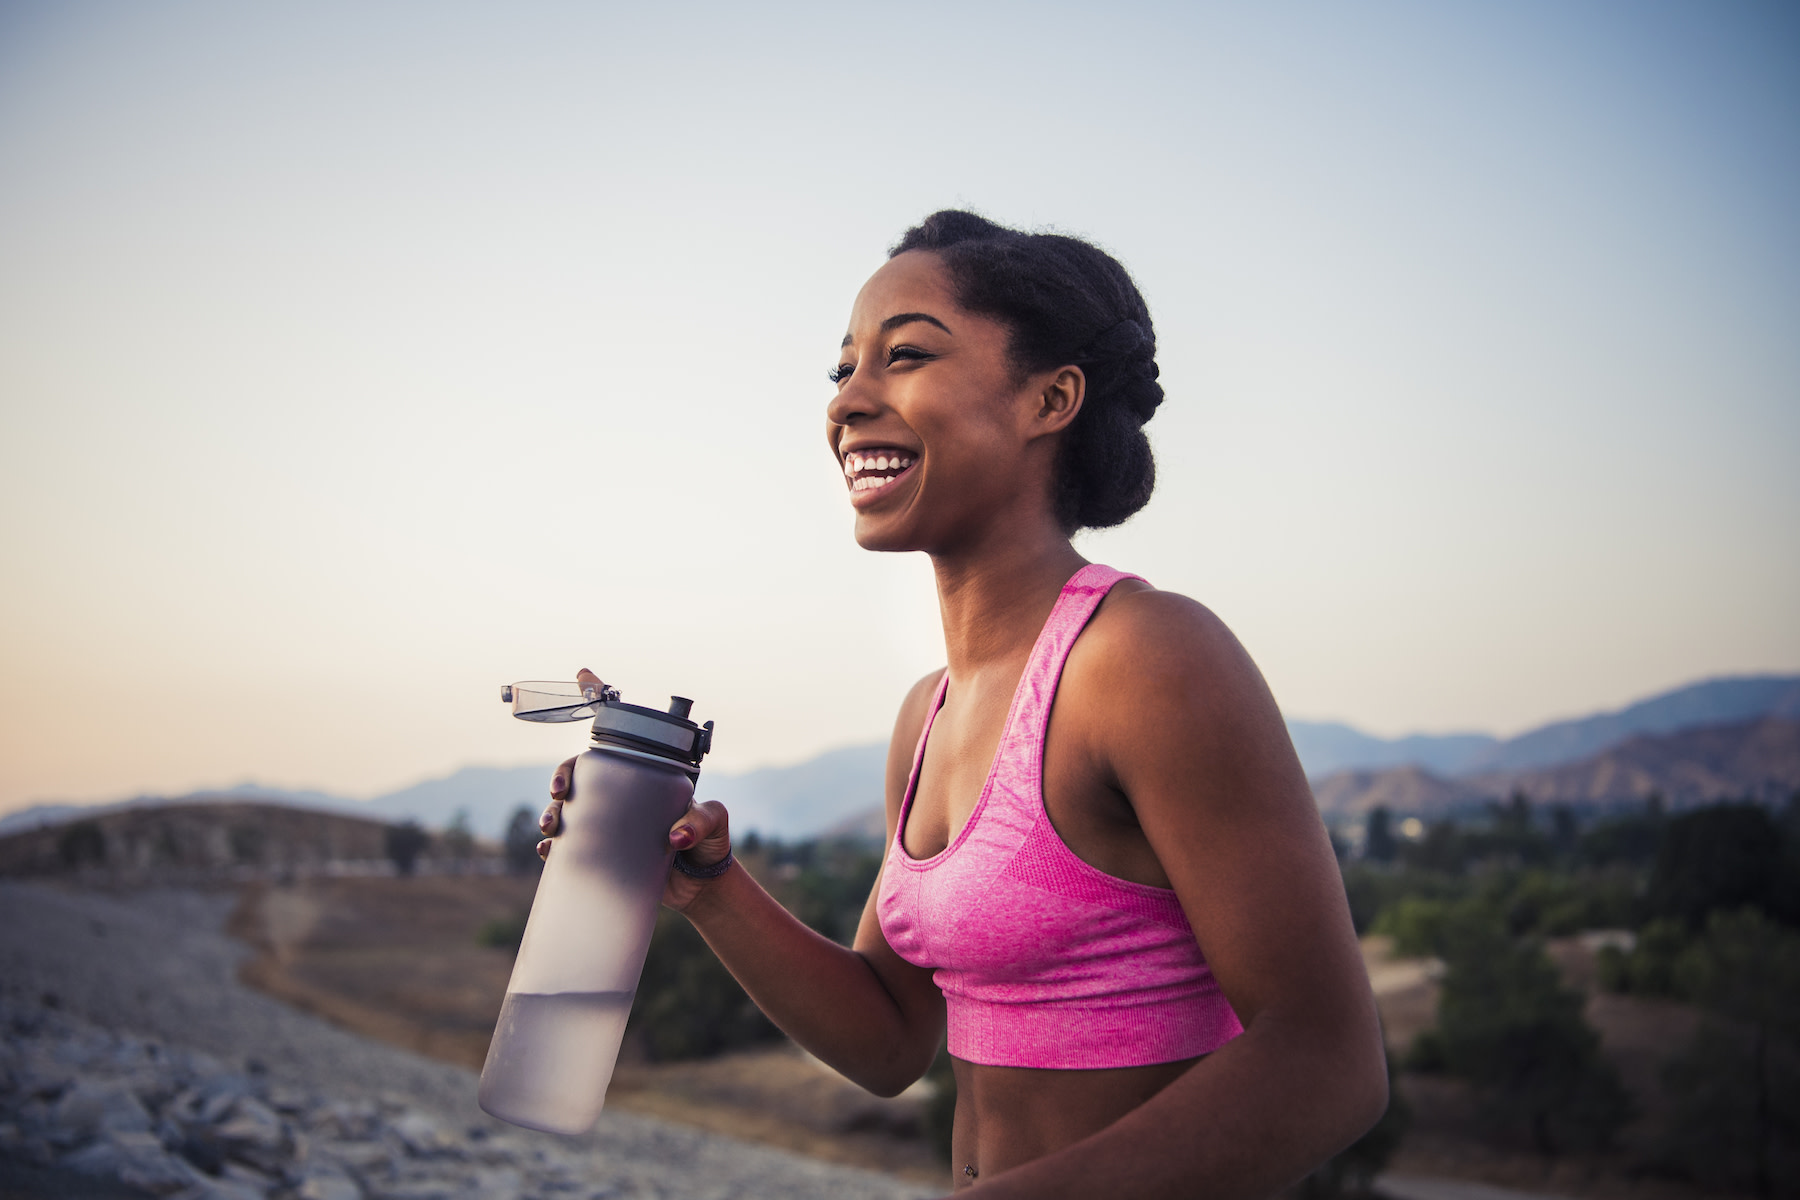 Woman drinks from a water bottle while on a run